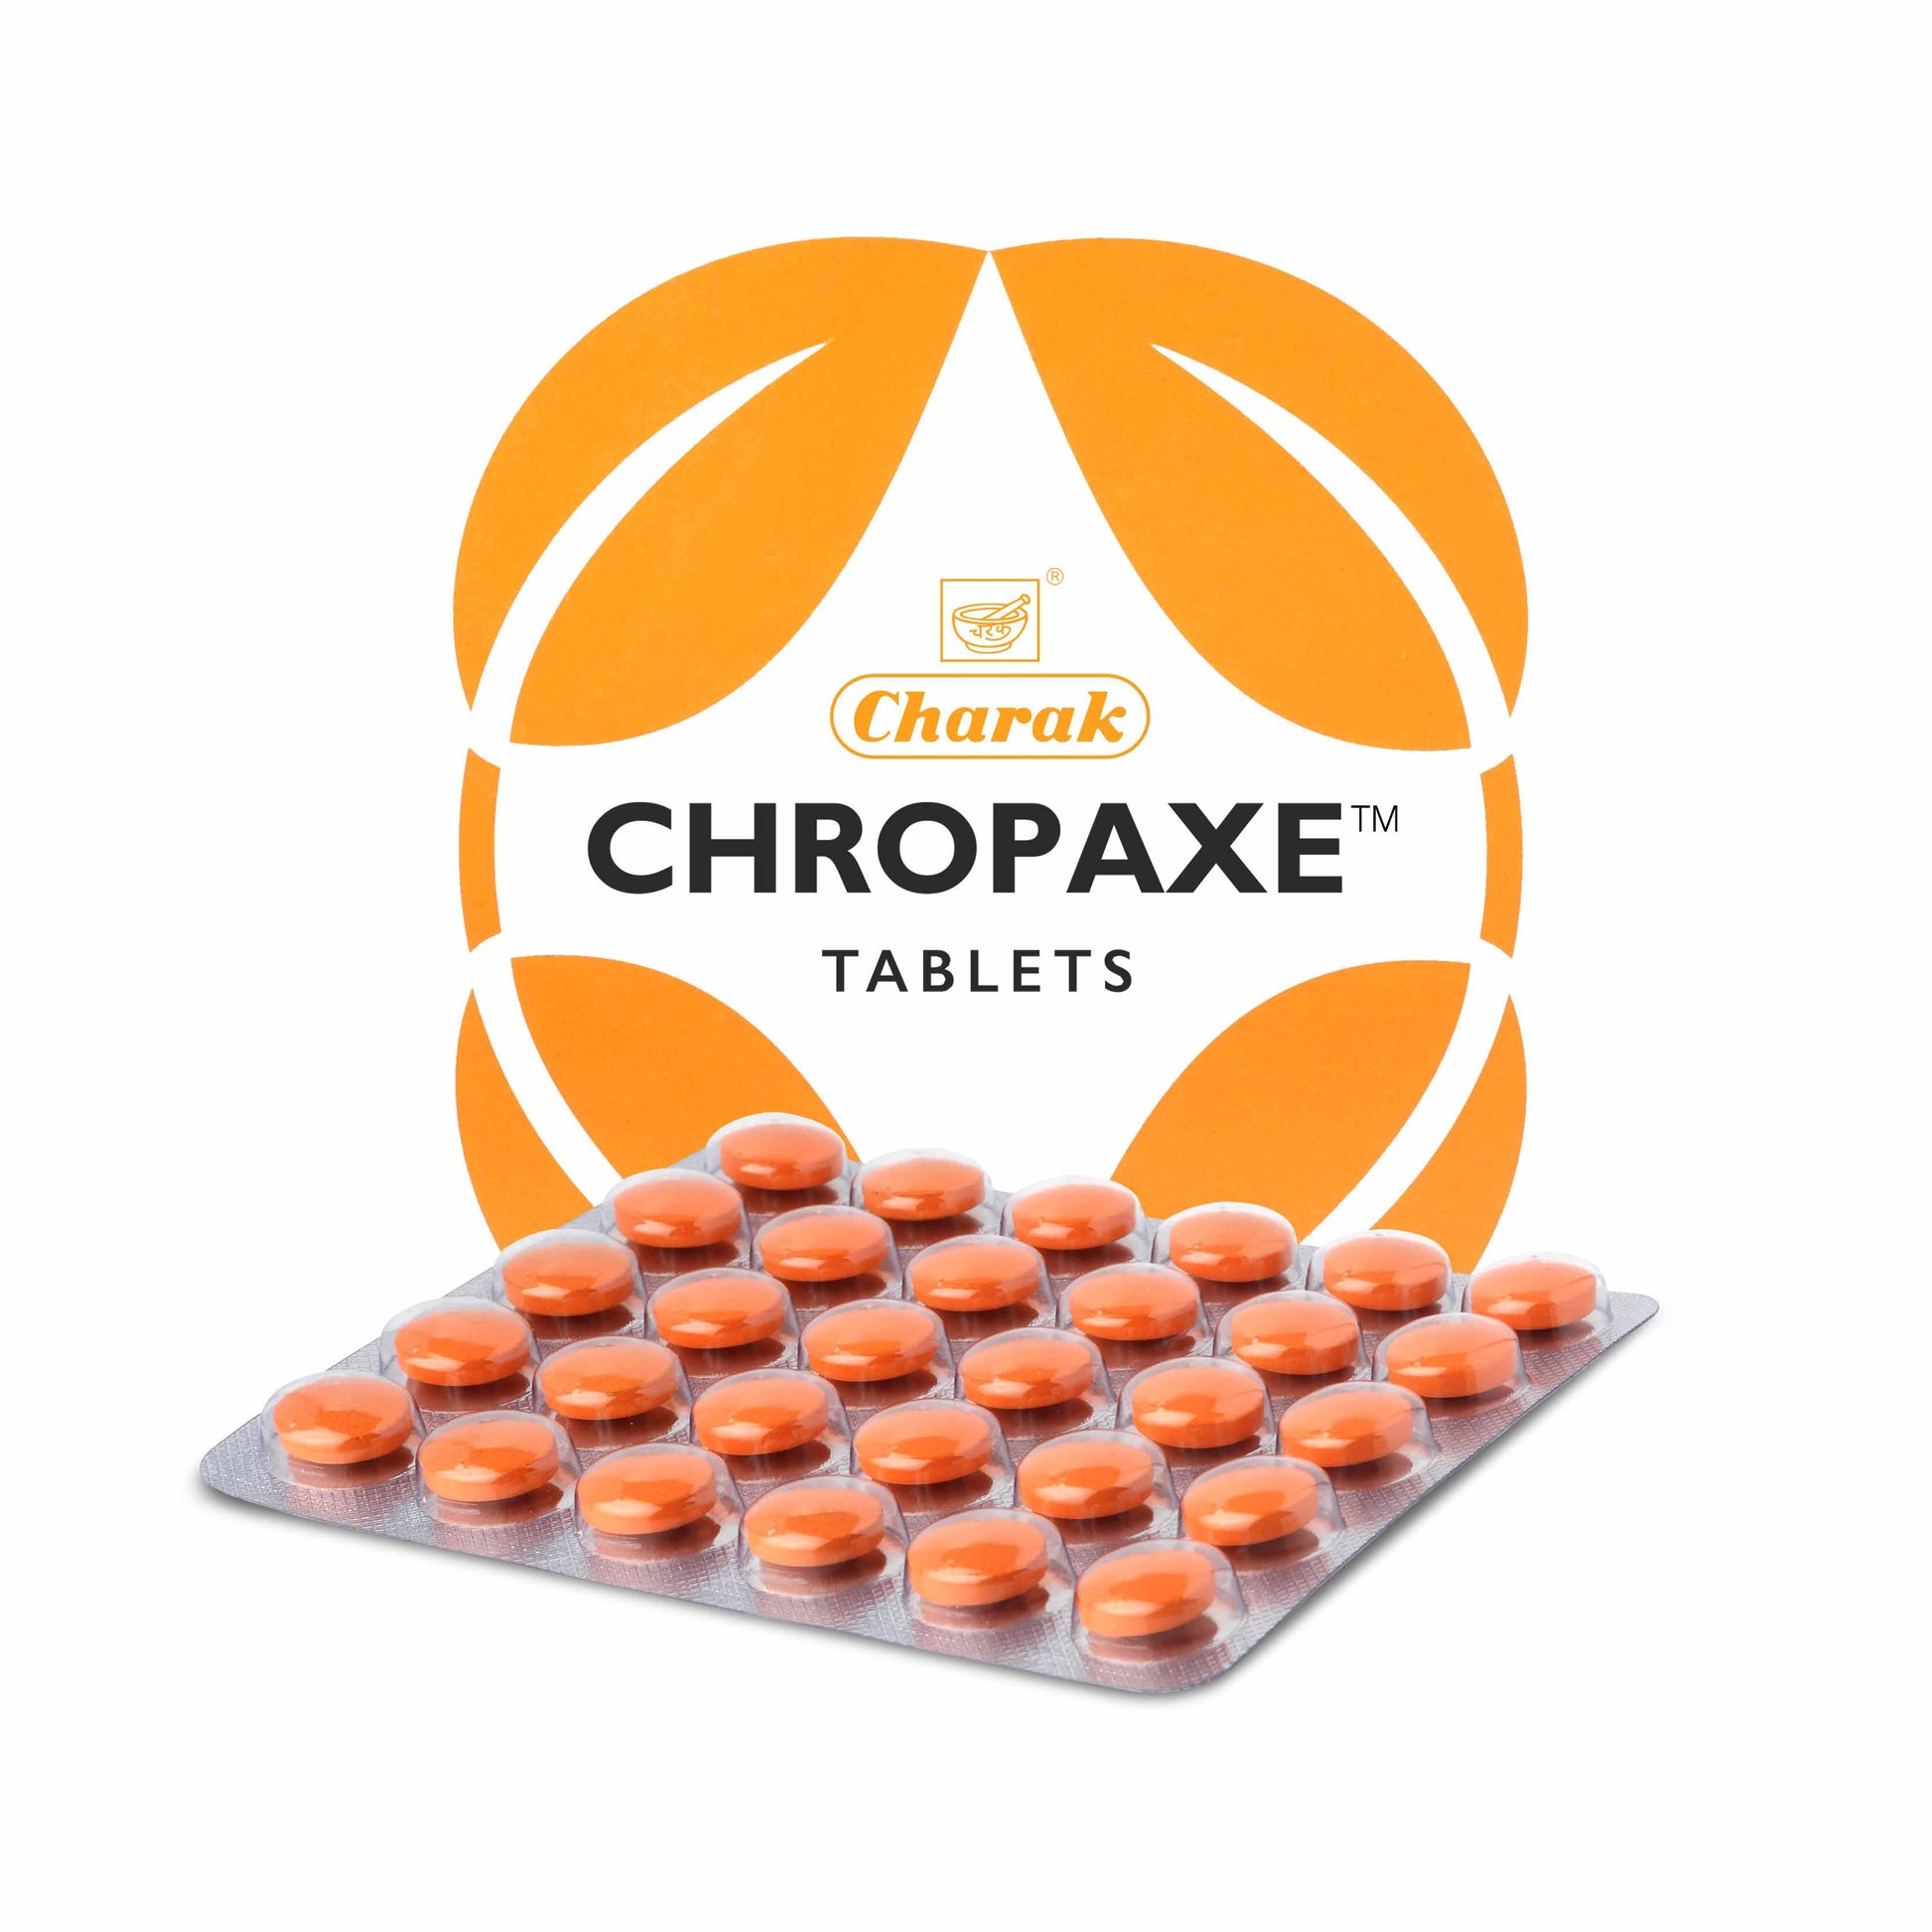 Shop Charak Chropaxe Tablets 30Tablets at price 248.00 from Charak Online - Ayush Care